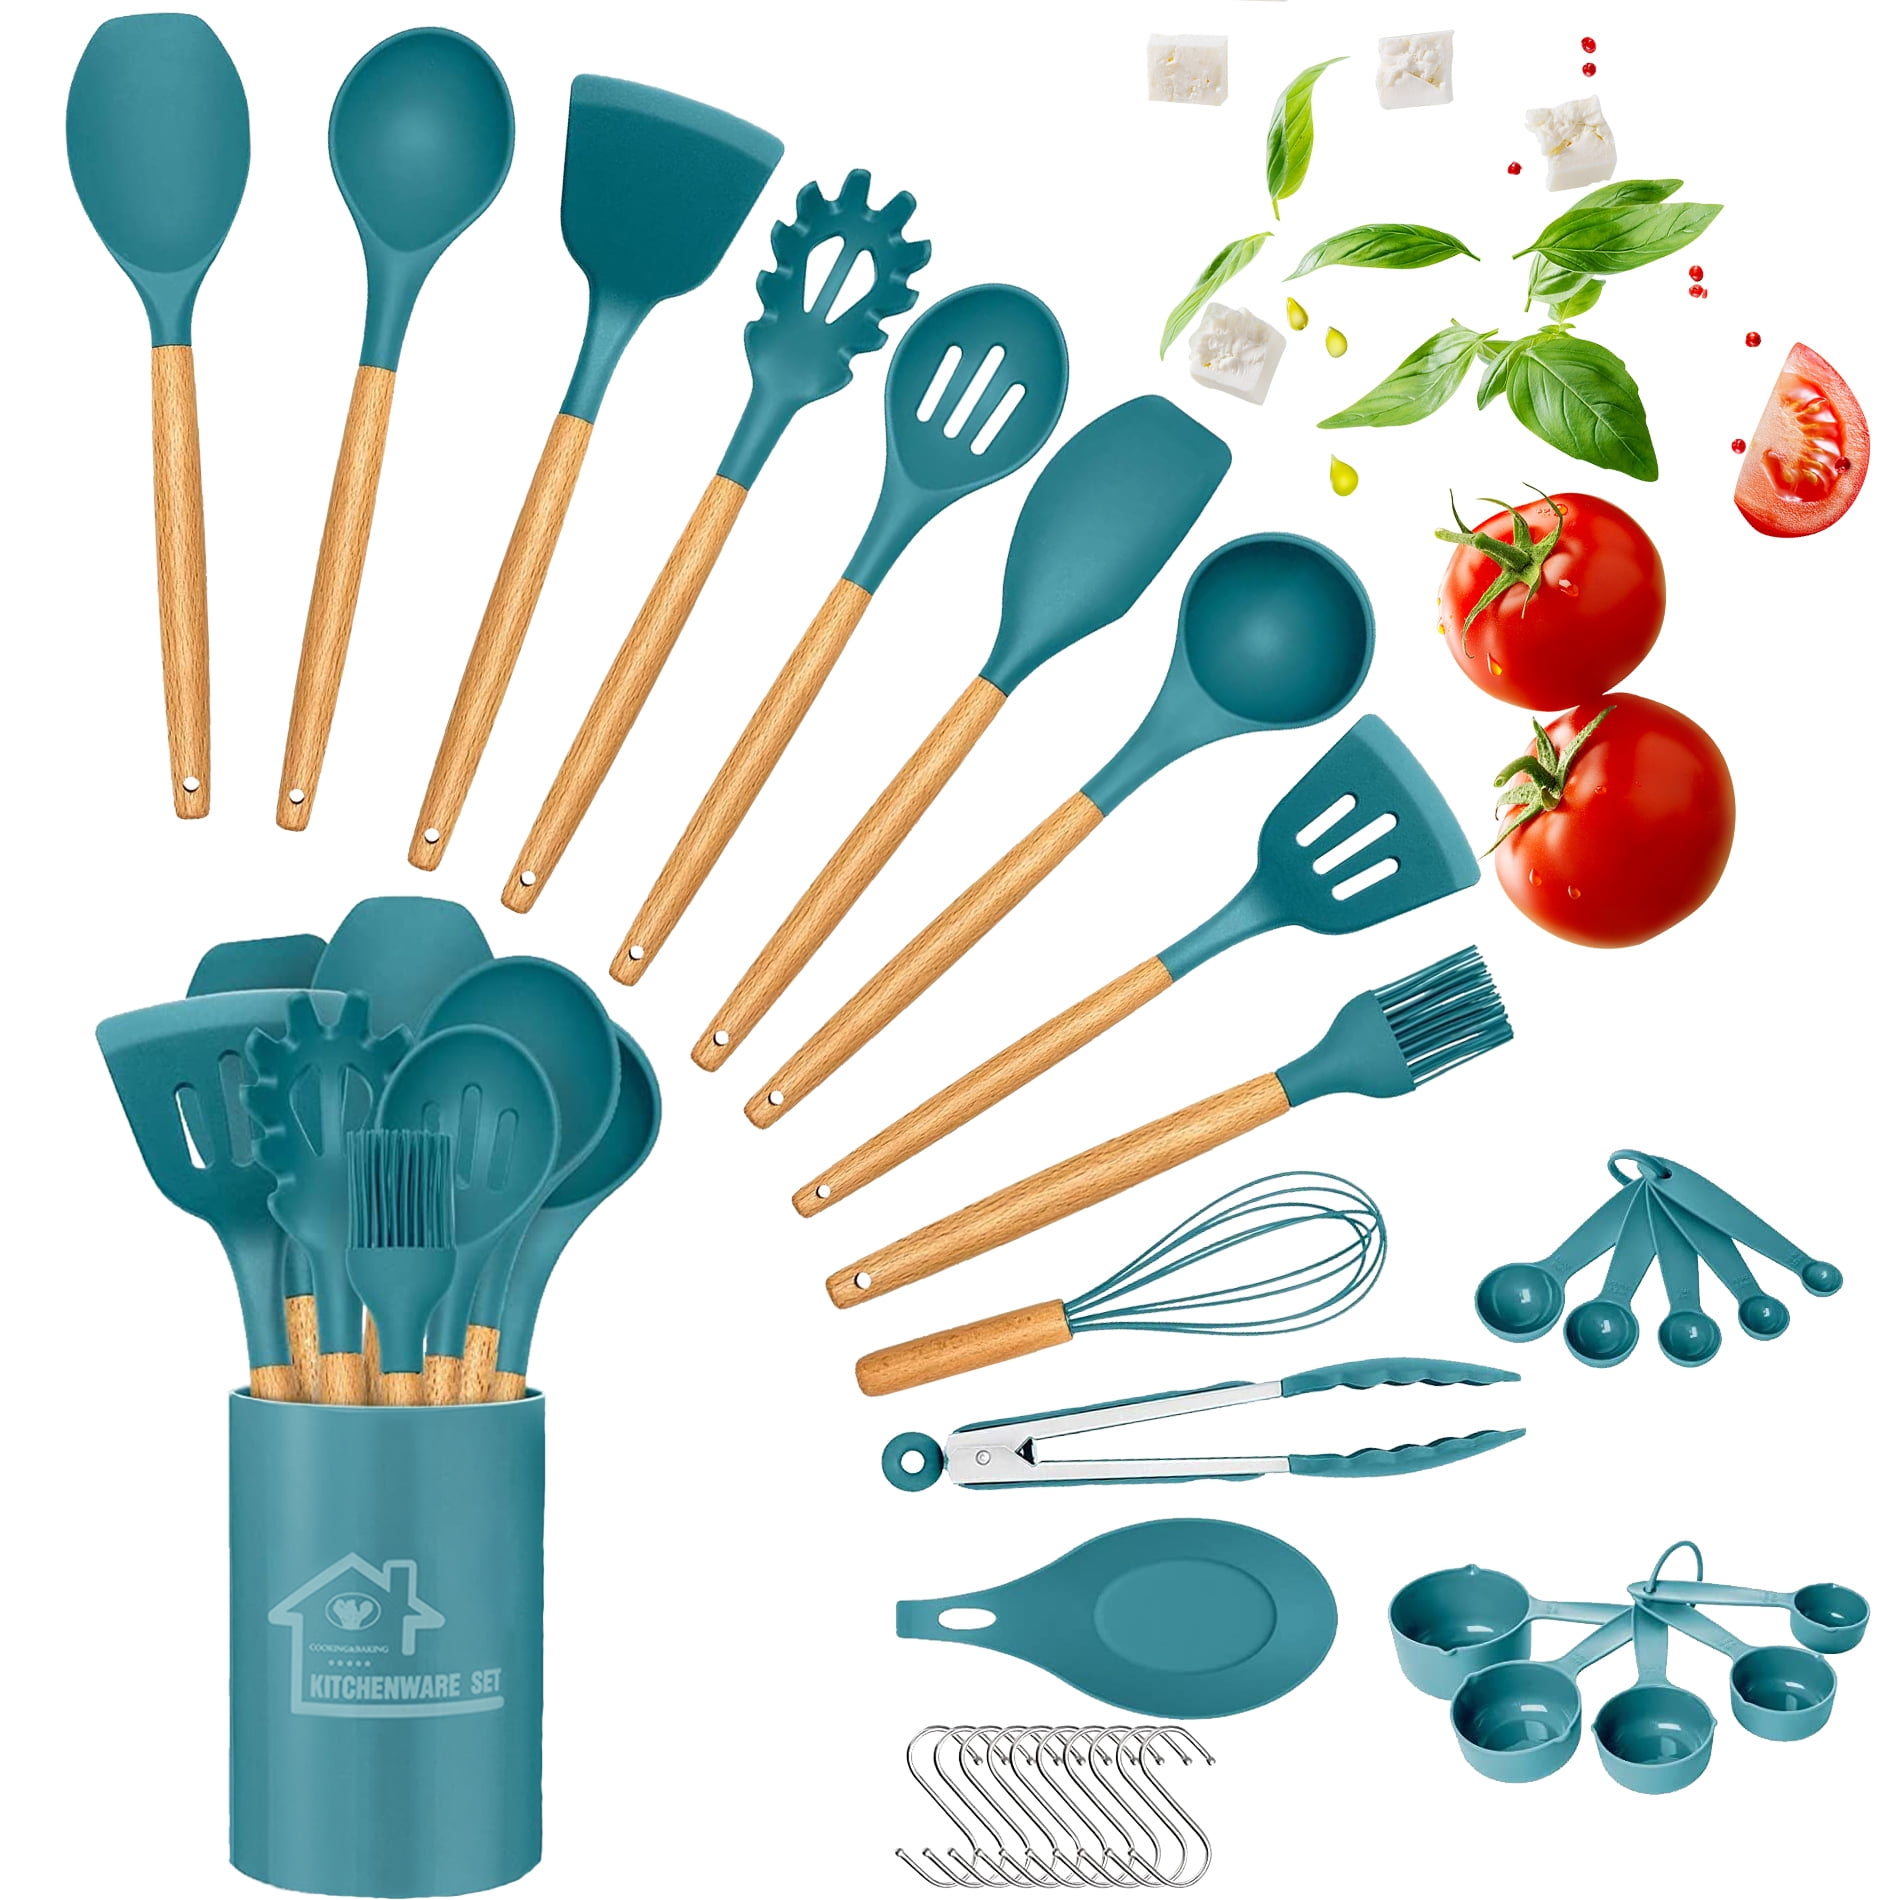 NutriChef 10 Pcs. Silicone Heat Resistant Kitchen Cooking Utensils Set -  Non-Stick Baking Tools with PP Holder (Blue & Black)